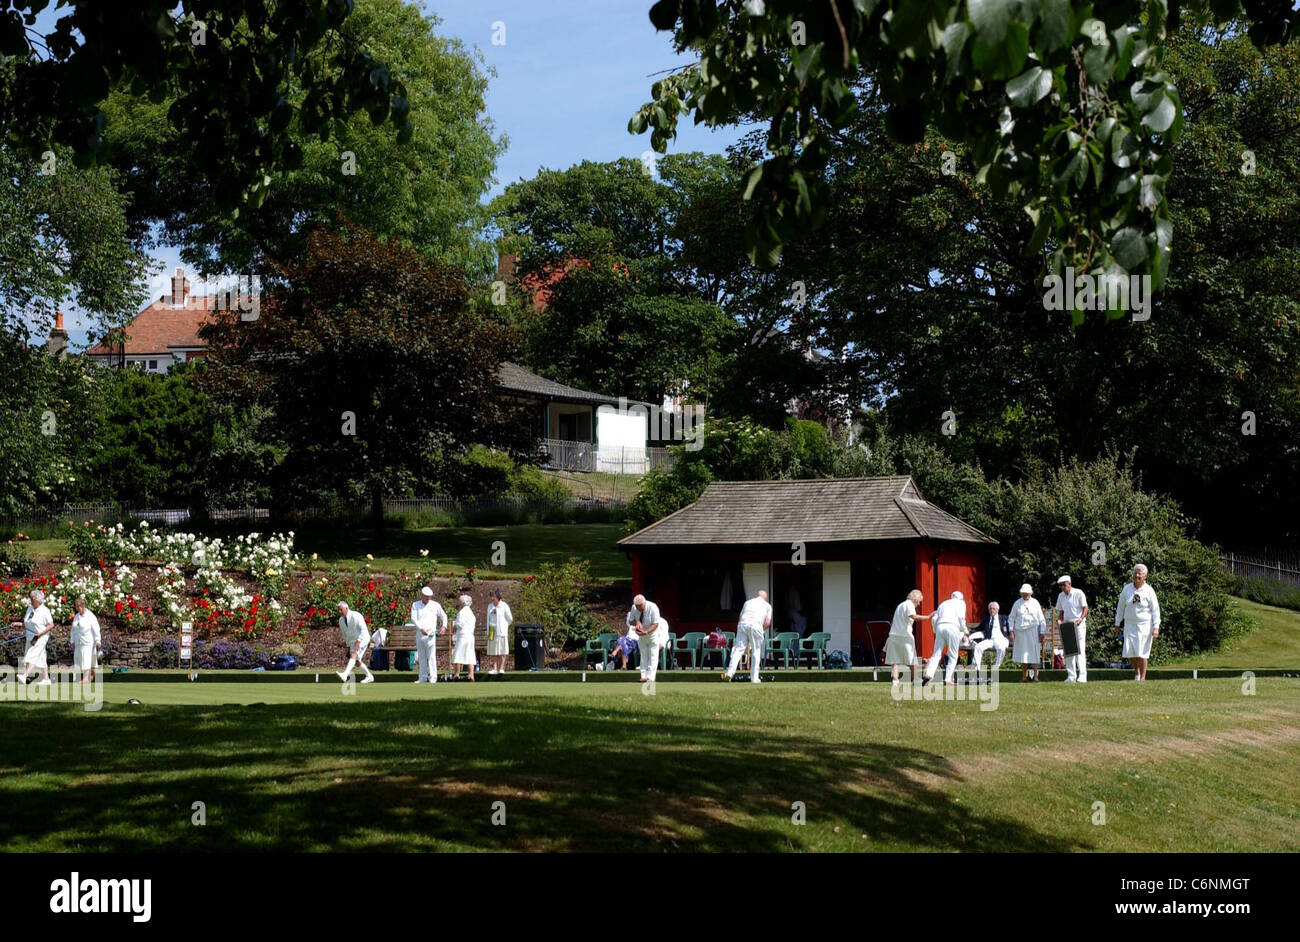 A traditional English scene as bowlers enjoy a match on the Queens Park bowling greens in Brighton Stock Photo